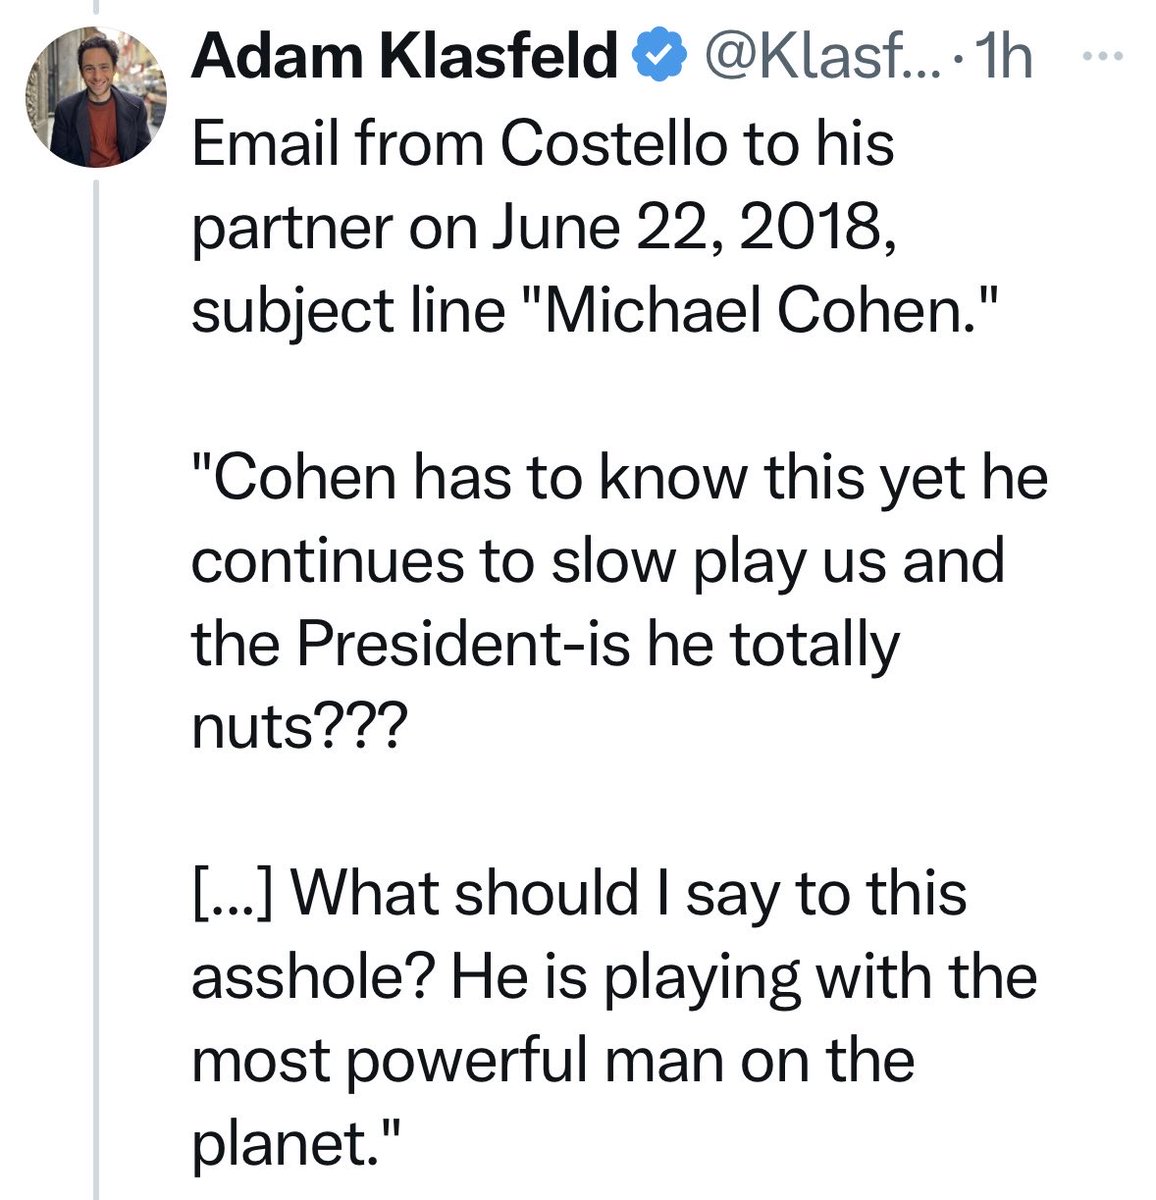 This is incredibly damning evidence, reinforcing what Costello’s ultimate goal was in trying to “represent” Michael Cohen. Costello complains that Cohen is being an “a$$hole” because he’s “playing us & the president.” So who do you think Costello was looking out for?